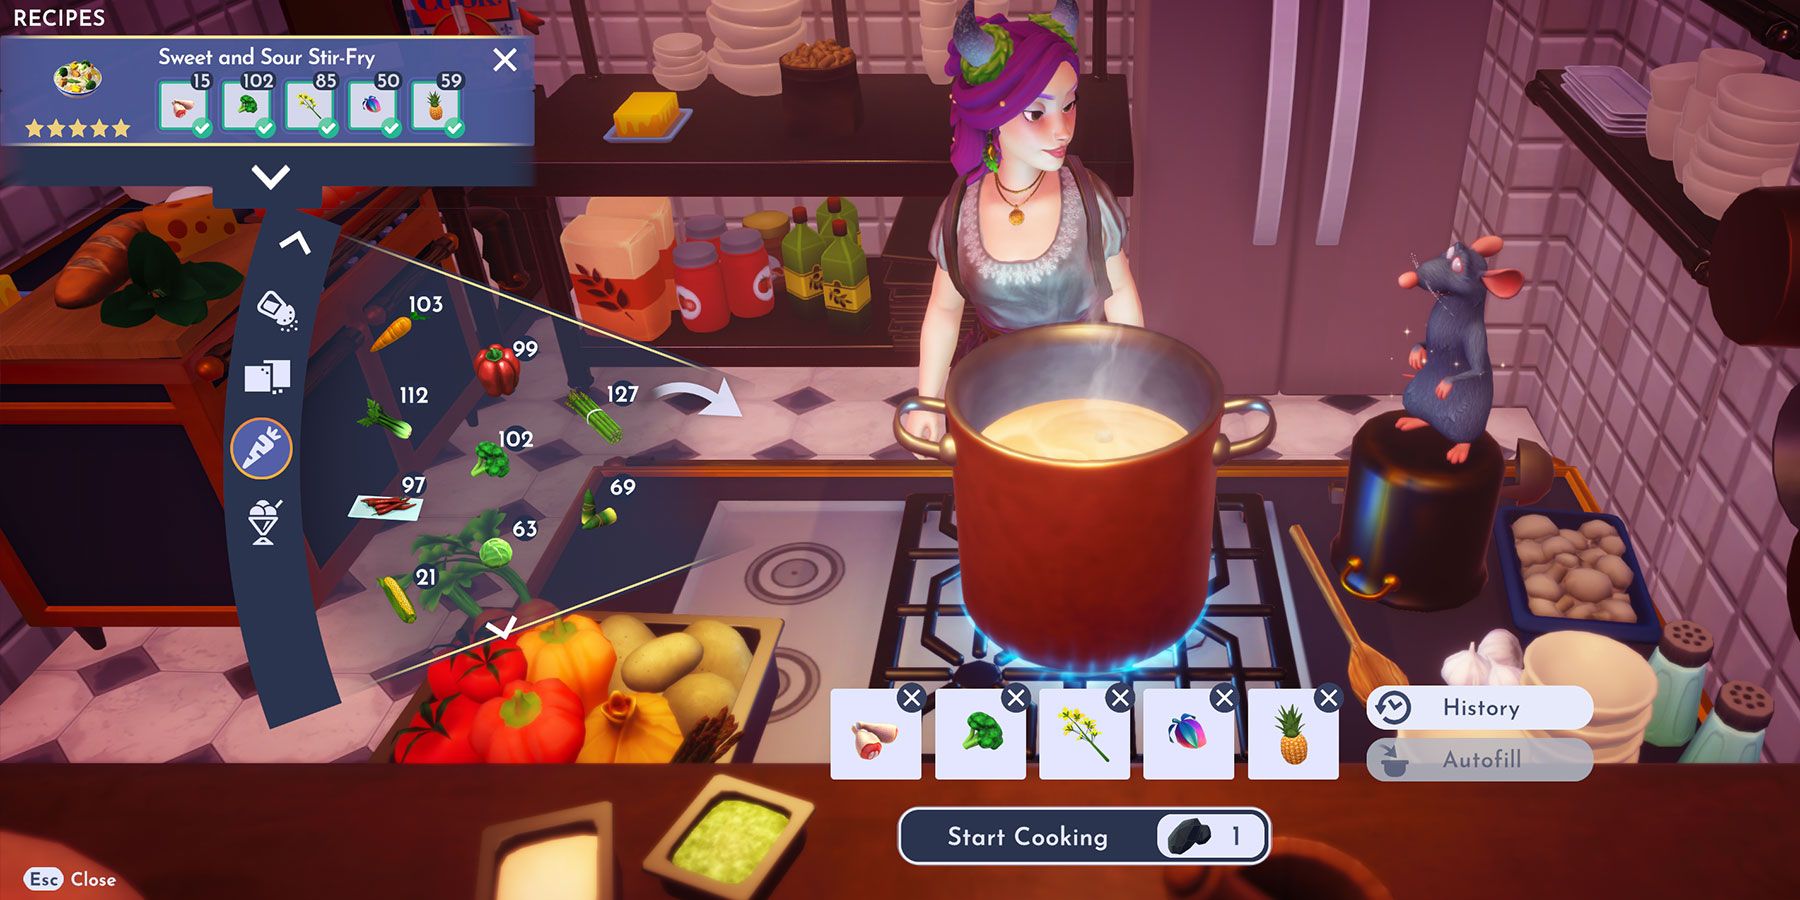 Sweet and Sour Stir-Fry recipe in Disney Dreamlight Valley